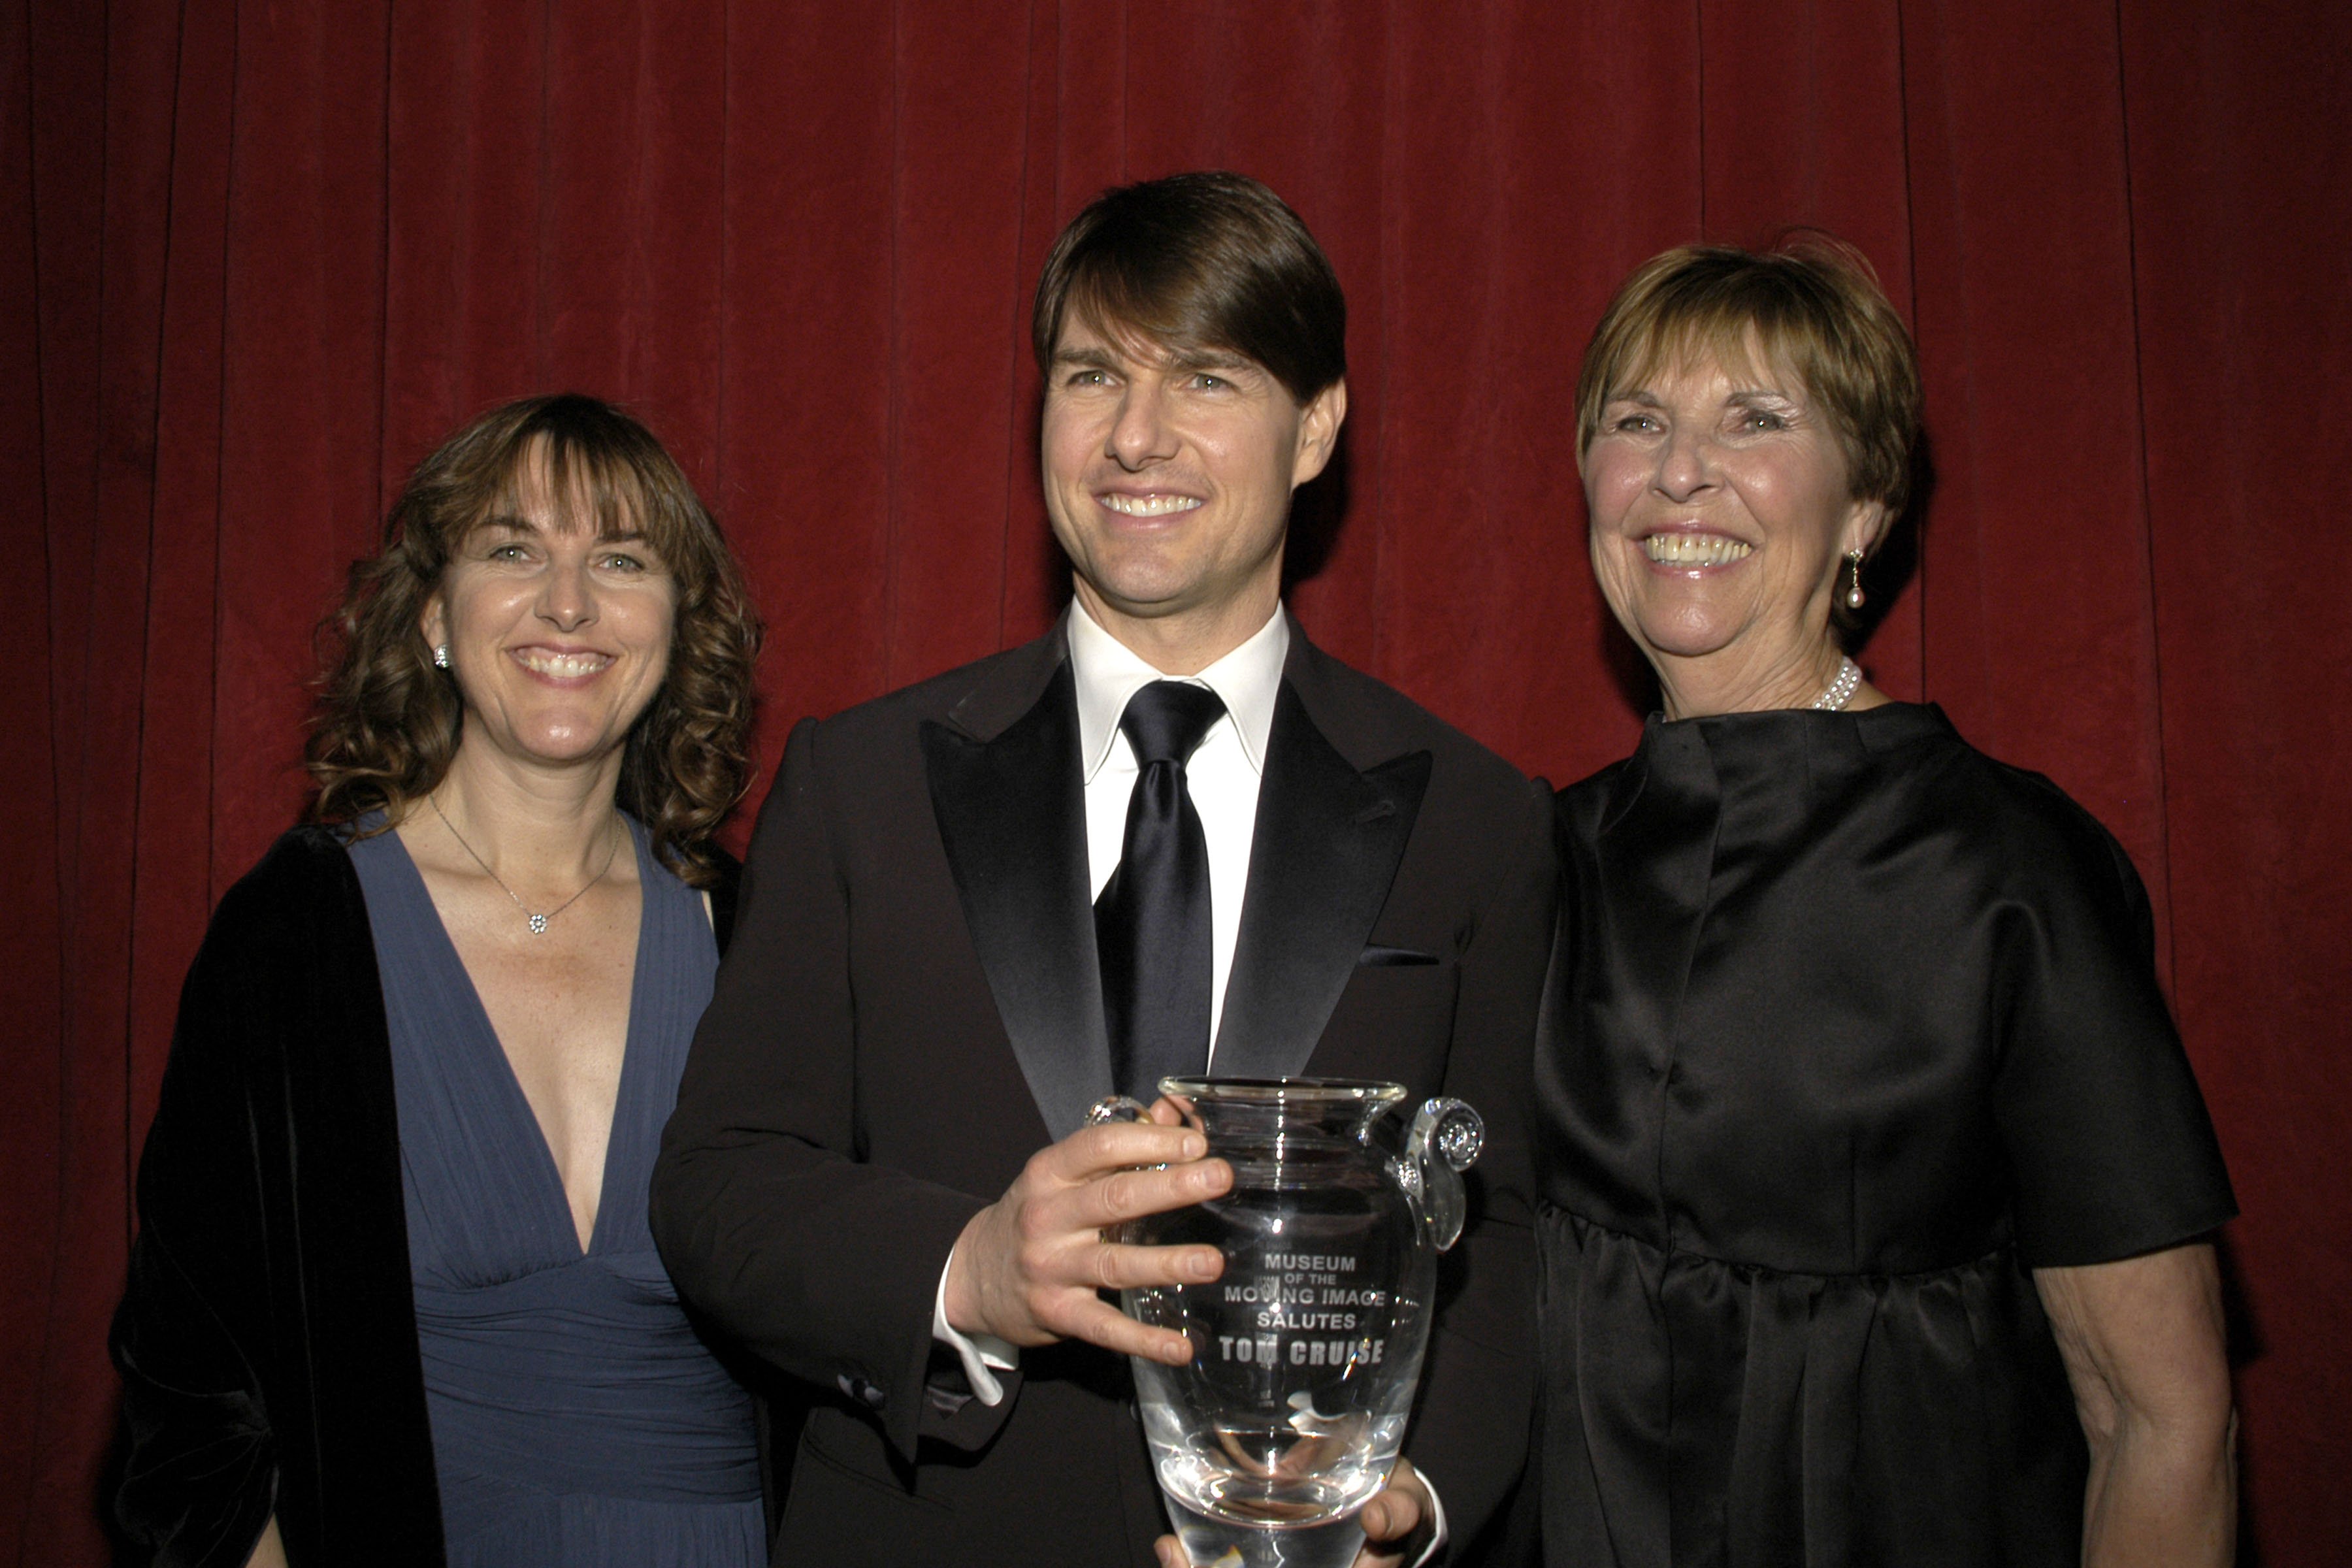 (L-R) Marian Mapother, Tom Cruise and Mary Lee Mapother South attend MUSEUM OF THE MOVING IMAGE SALUTES TOM CRUISE at Cipriani 42nd Street on November 6, 2007 in New York City. | Source: Getty Images